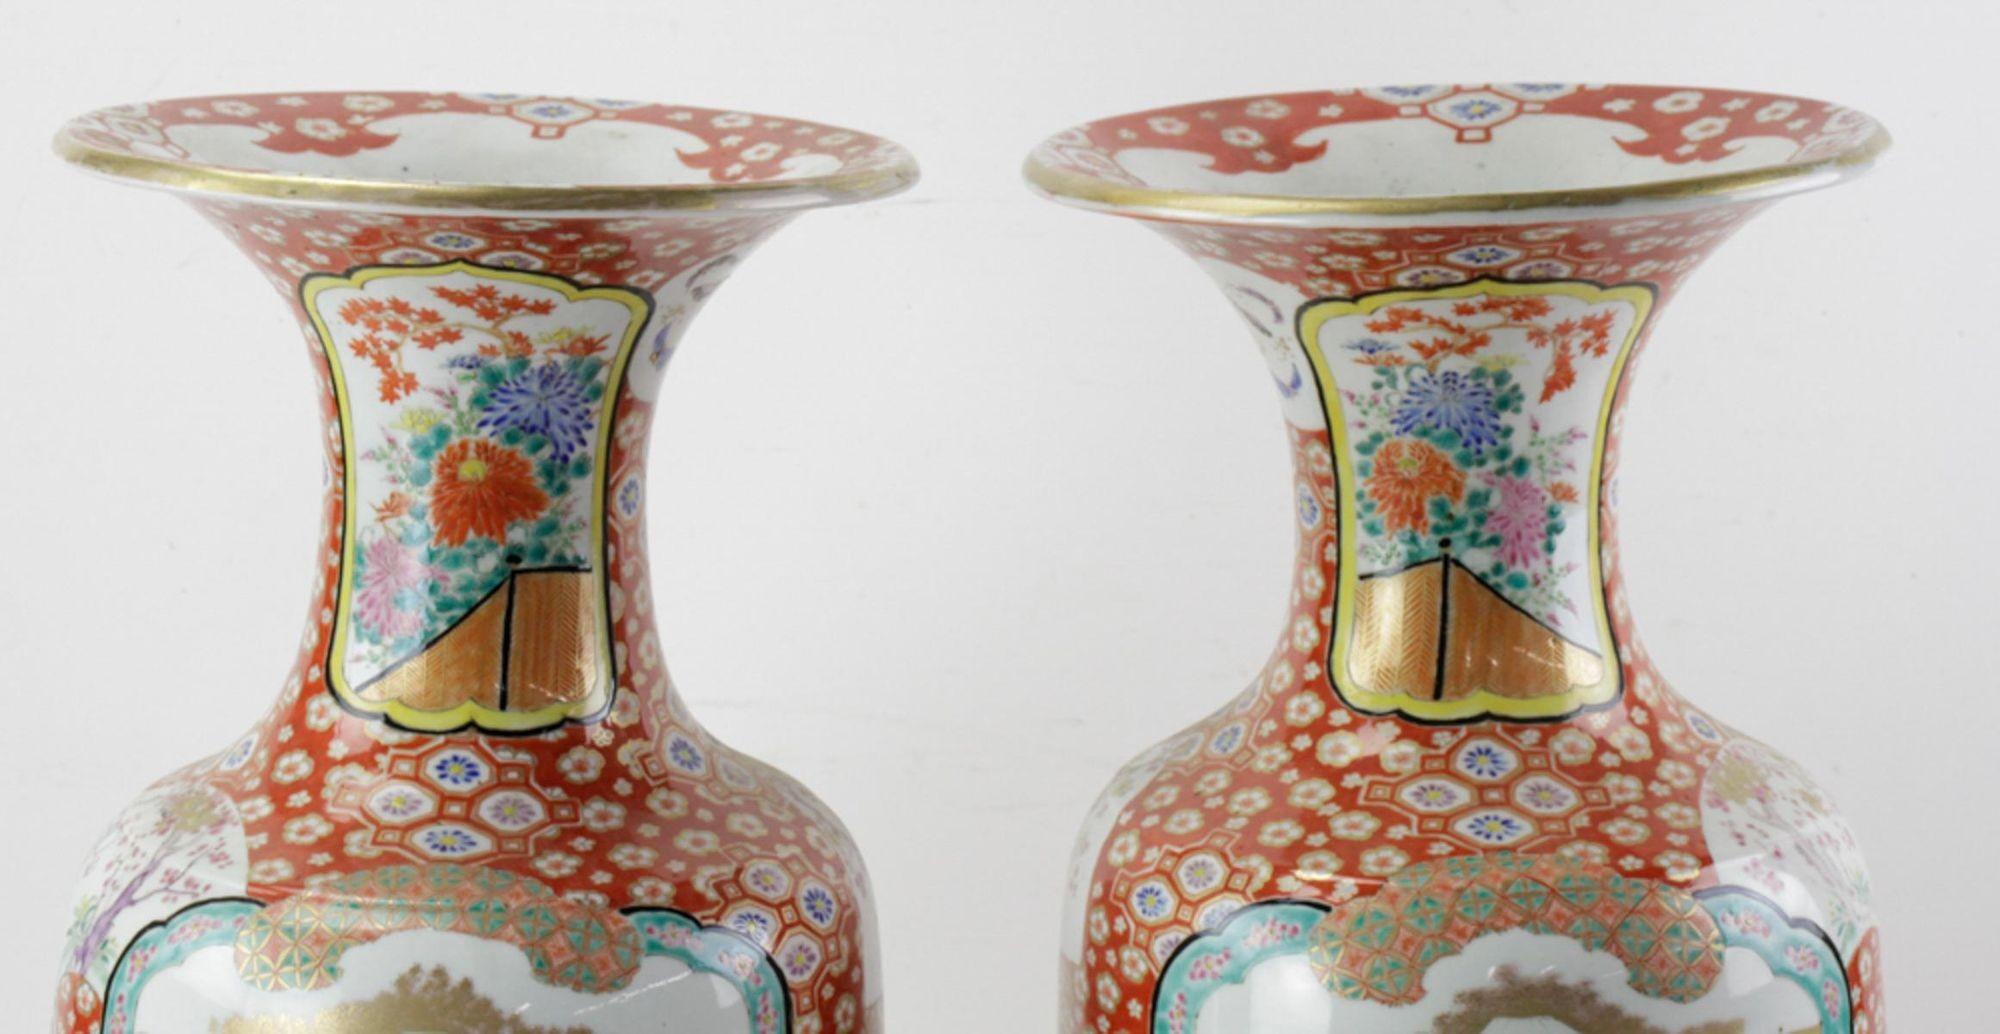 Pair of Late 19th Century Japanese Porcelain Vases For Sale 5